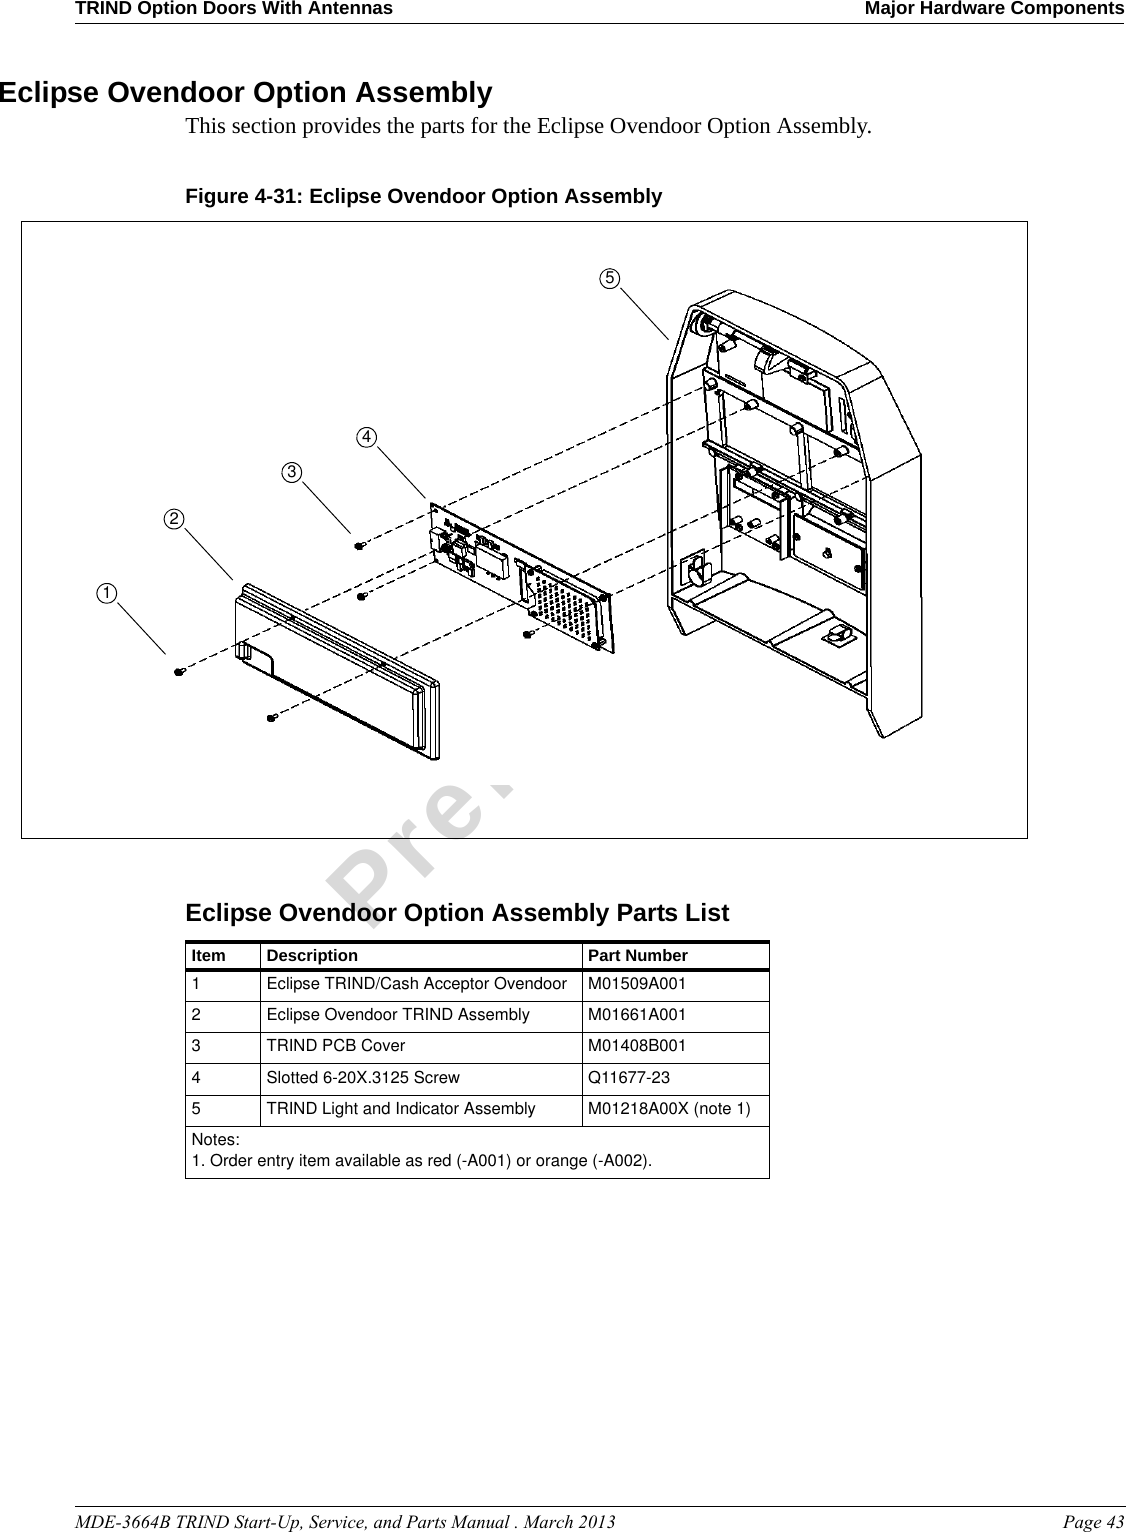 MDE-3664B TRIND Start-Up, Service, and Parts Manual . March 2013 Page 43TRIND Option Doors With Antennas Major Hardware ComponentsPreliminaryEclipse Ovendoor Option AssemblyThis section provides the parts for the Eclipse Ovendoor Option Assembly.Figure 4-31: 12345Eclipse Ovendoor Option AssemblyEclipse Ovendoor Option Assembly Parts ListItem Description Part Number1Eclipse TRIND/Cash Acceptor Ovendoor M01509A0012Eclipse Ovendoor TRIND Assembly M01661A0013TRIND PCB Cover M01408B0014Slotted 6-20X.3125 Screw Q11677-235TRIND Light and Indicator Assembly M01218A00X (note 1)Notes:1. Order entry item available as red (-A001) or orange (-A002).